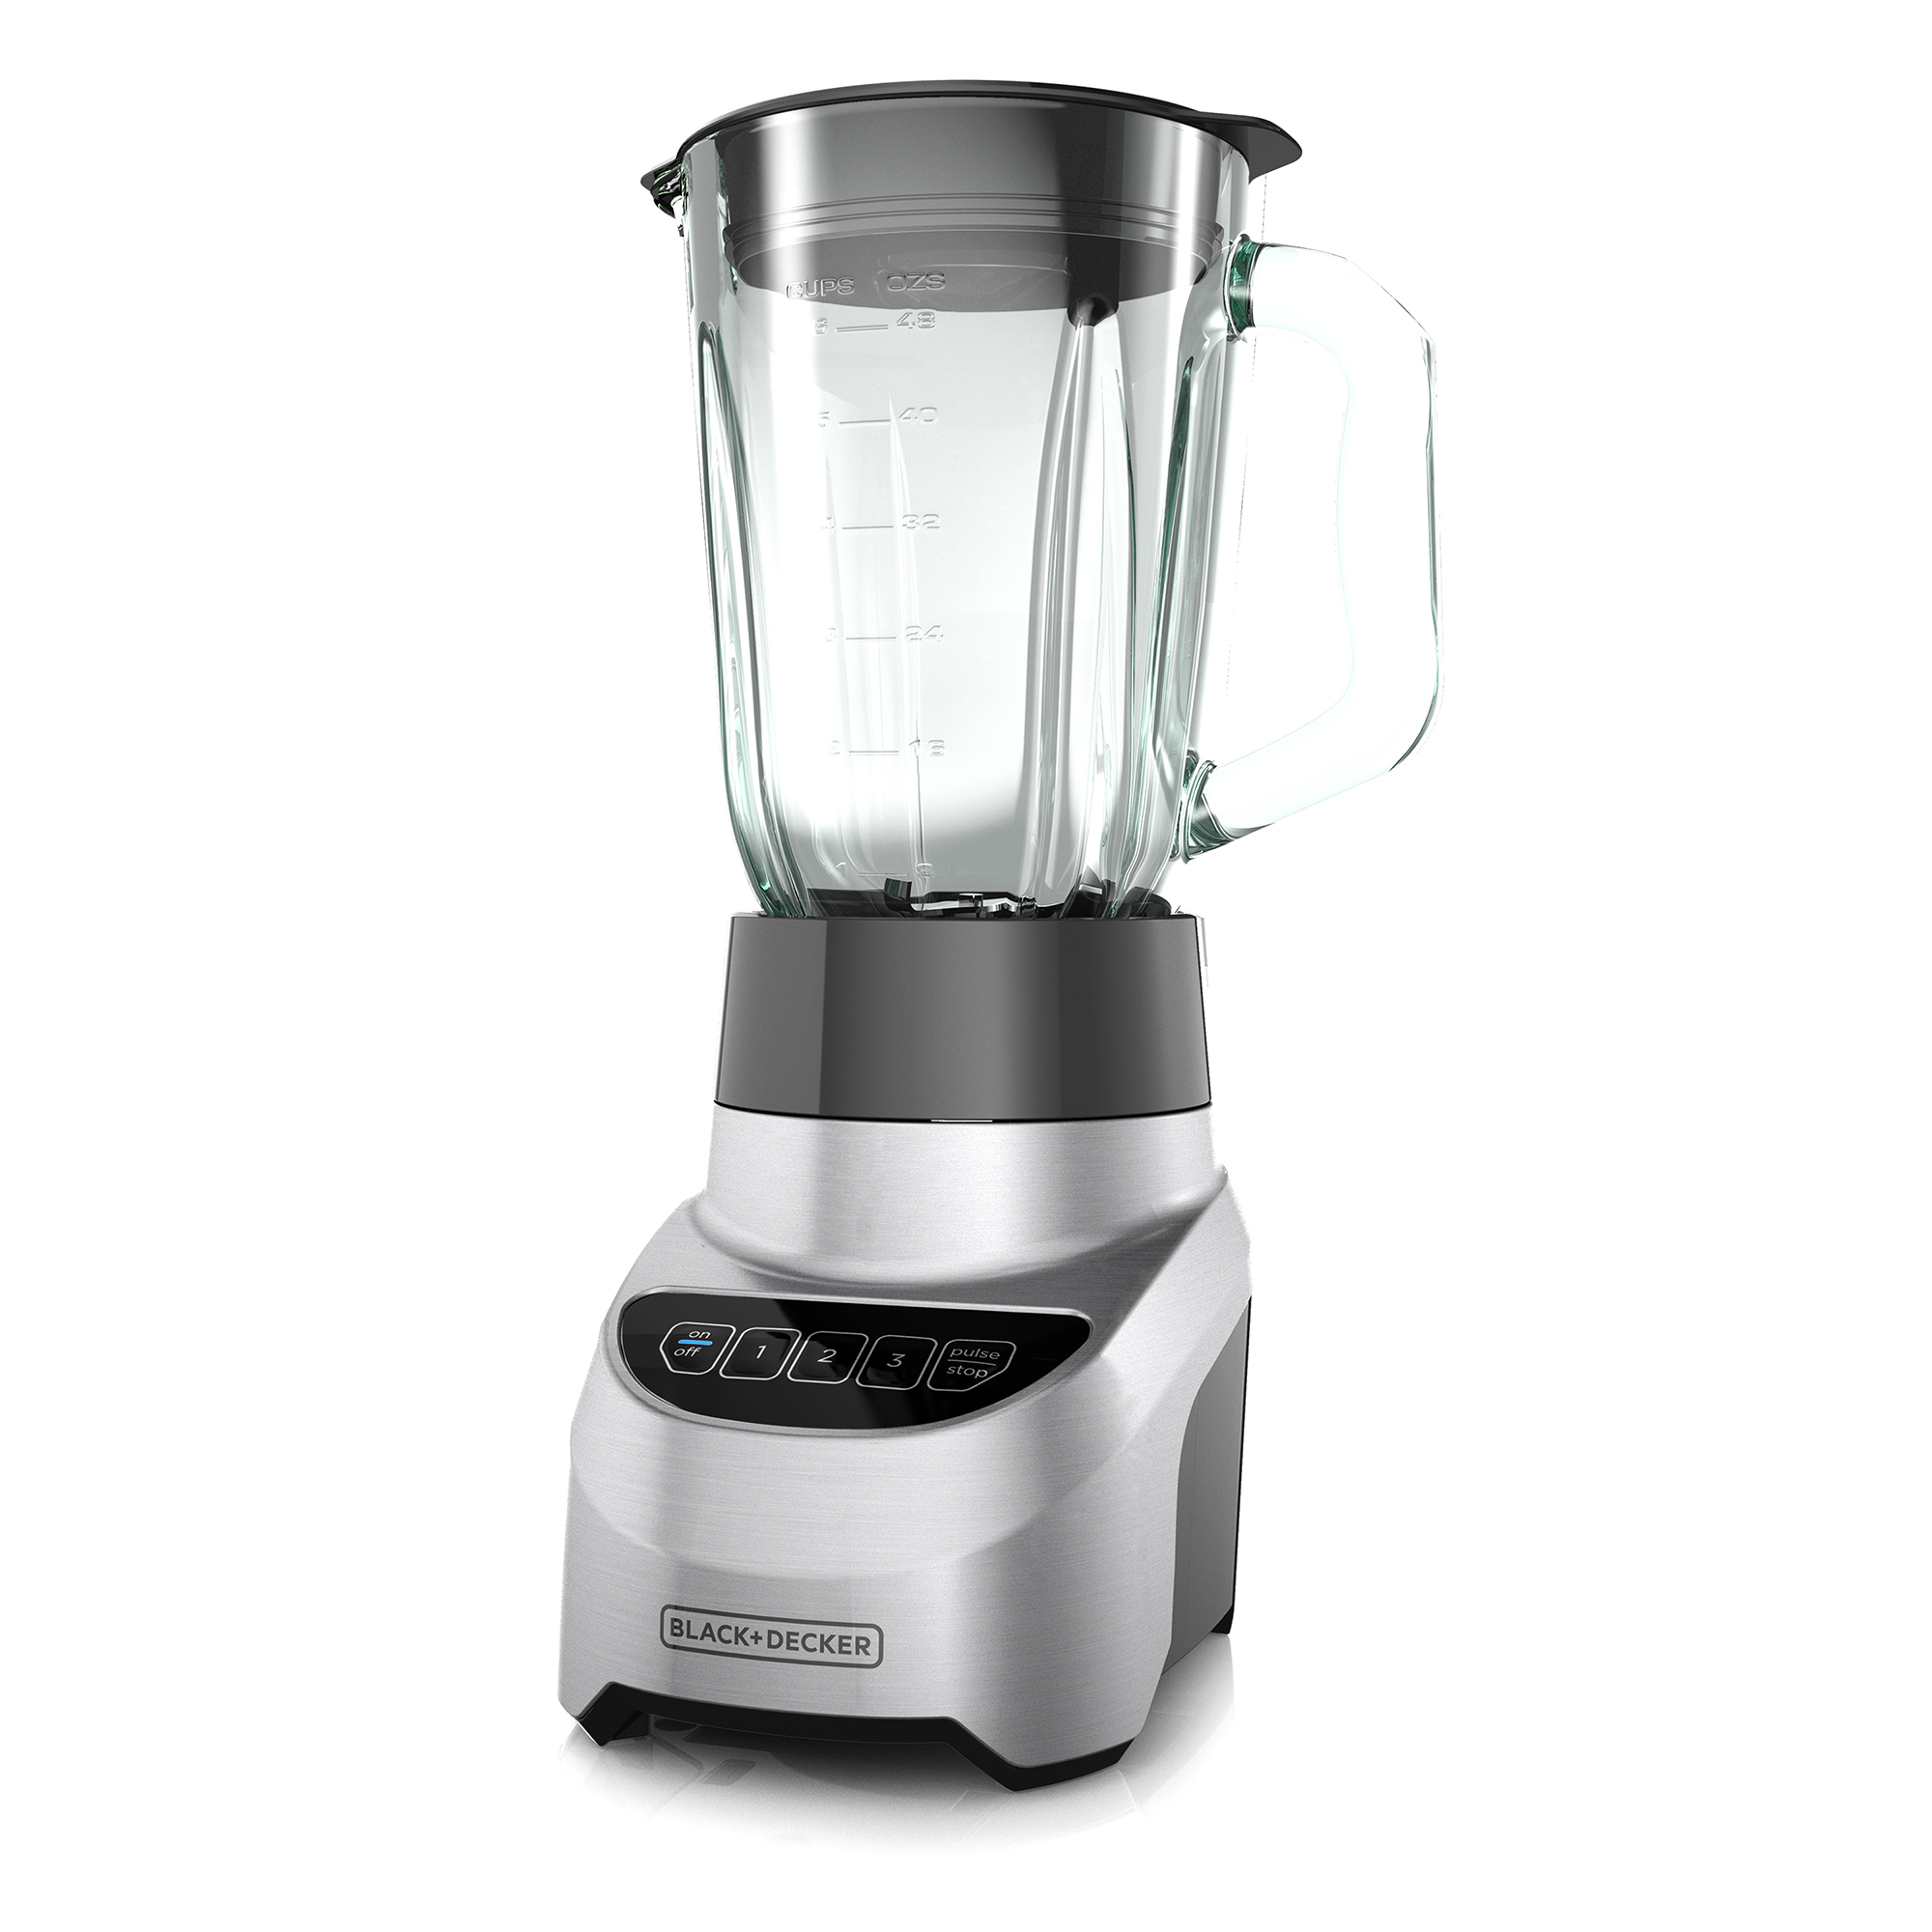 BLACK+DECKER Appliances - One for home and one for the road.​ ​ The power  base for the BLACK+DECKER™ Quiet Blender is compatible with the 48-oz.  Cyclone® Glass Jar and the 24-oz. Personal